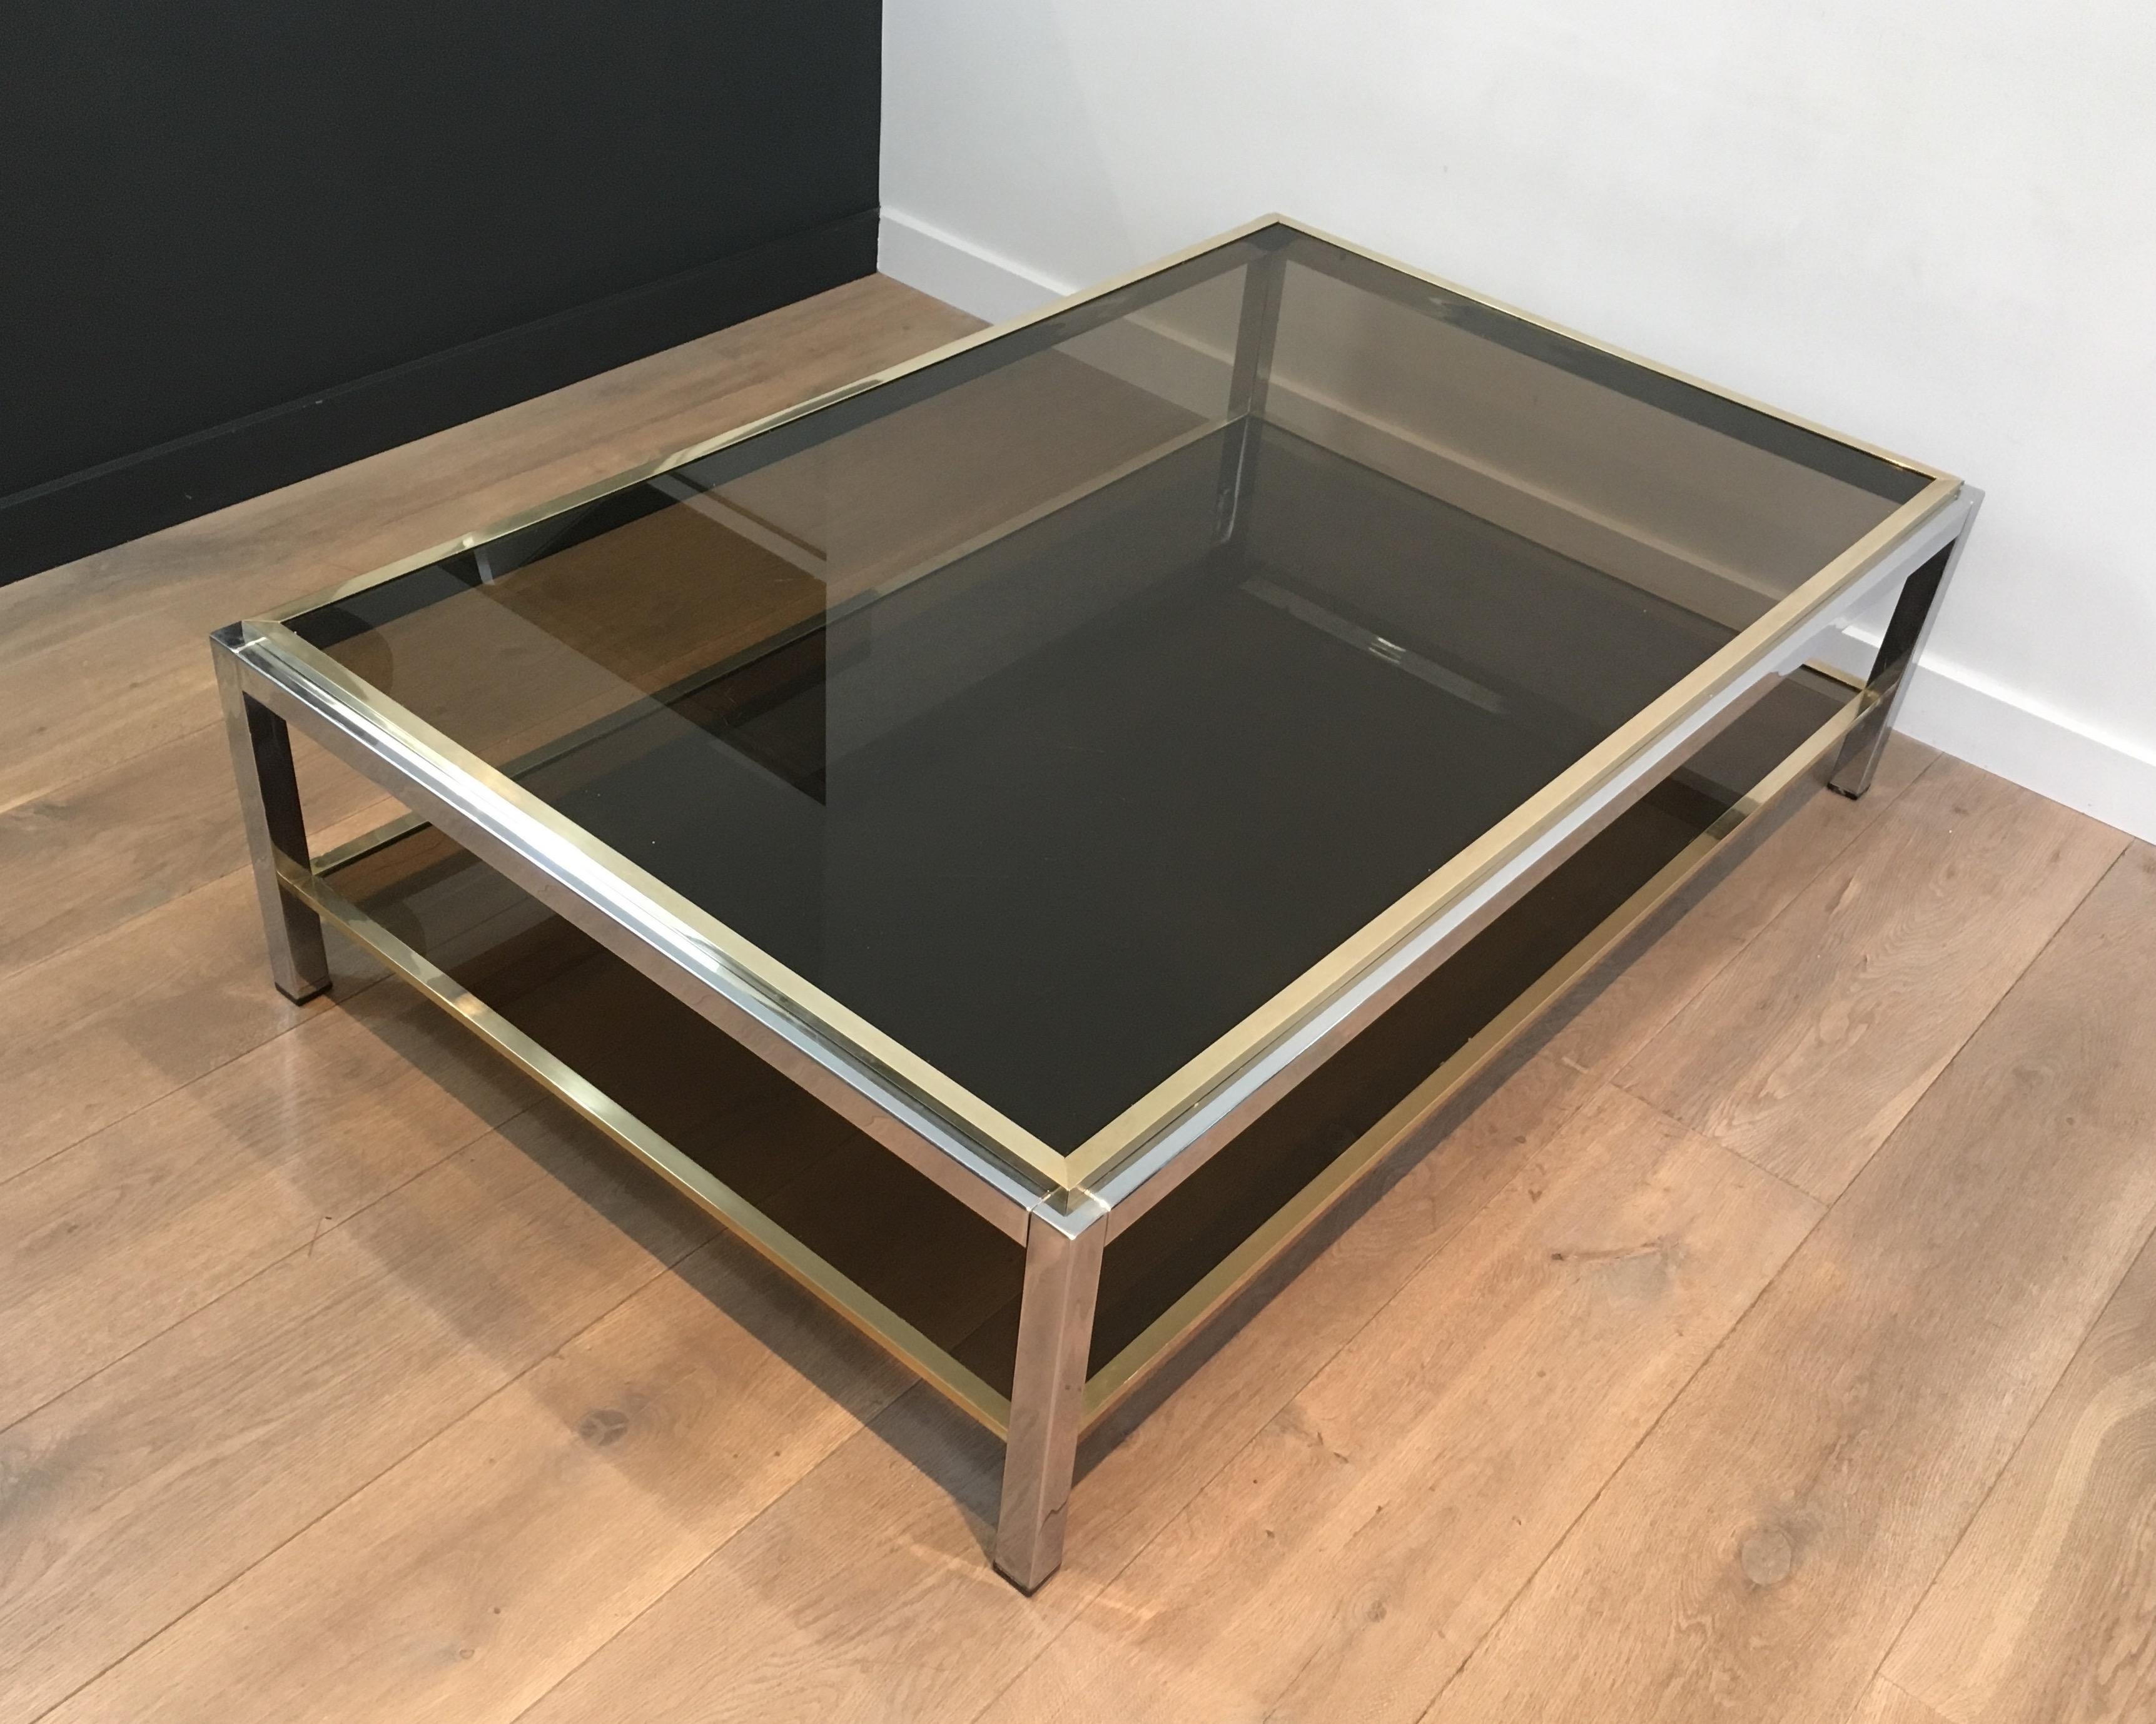 French Attributed to Willy Rizzo, Large Chrome and Brass Coffee Table with Smoked Glass